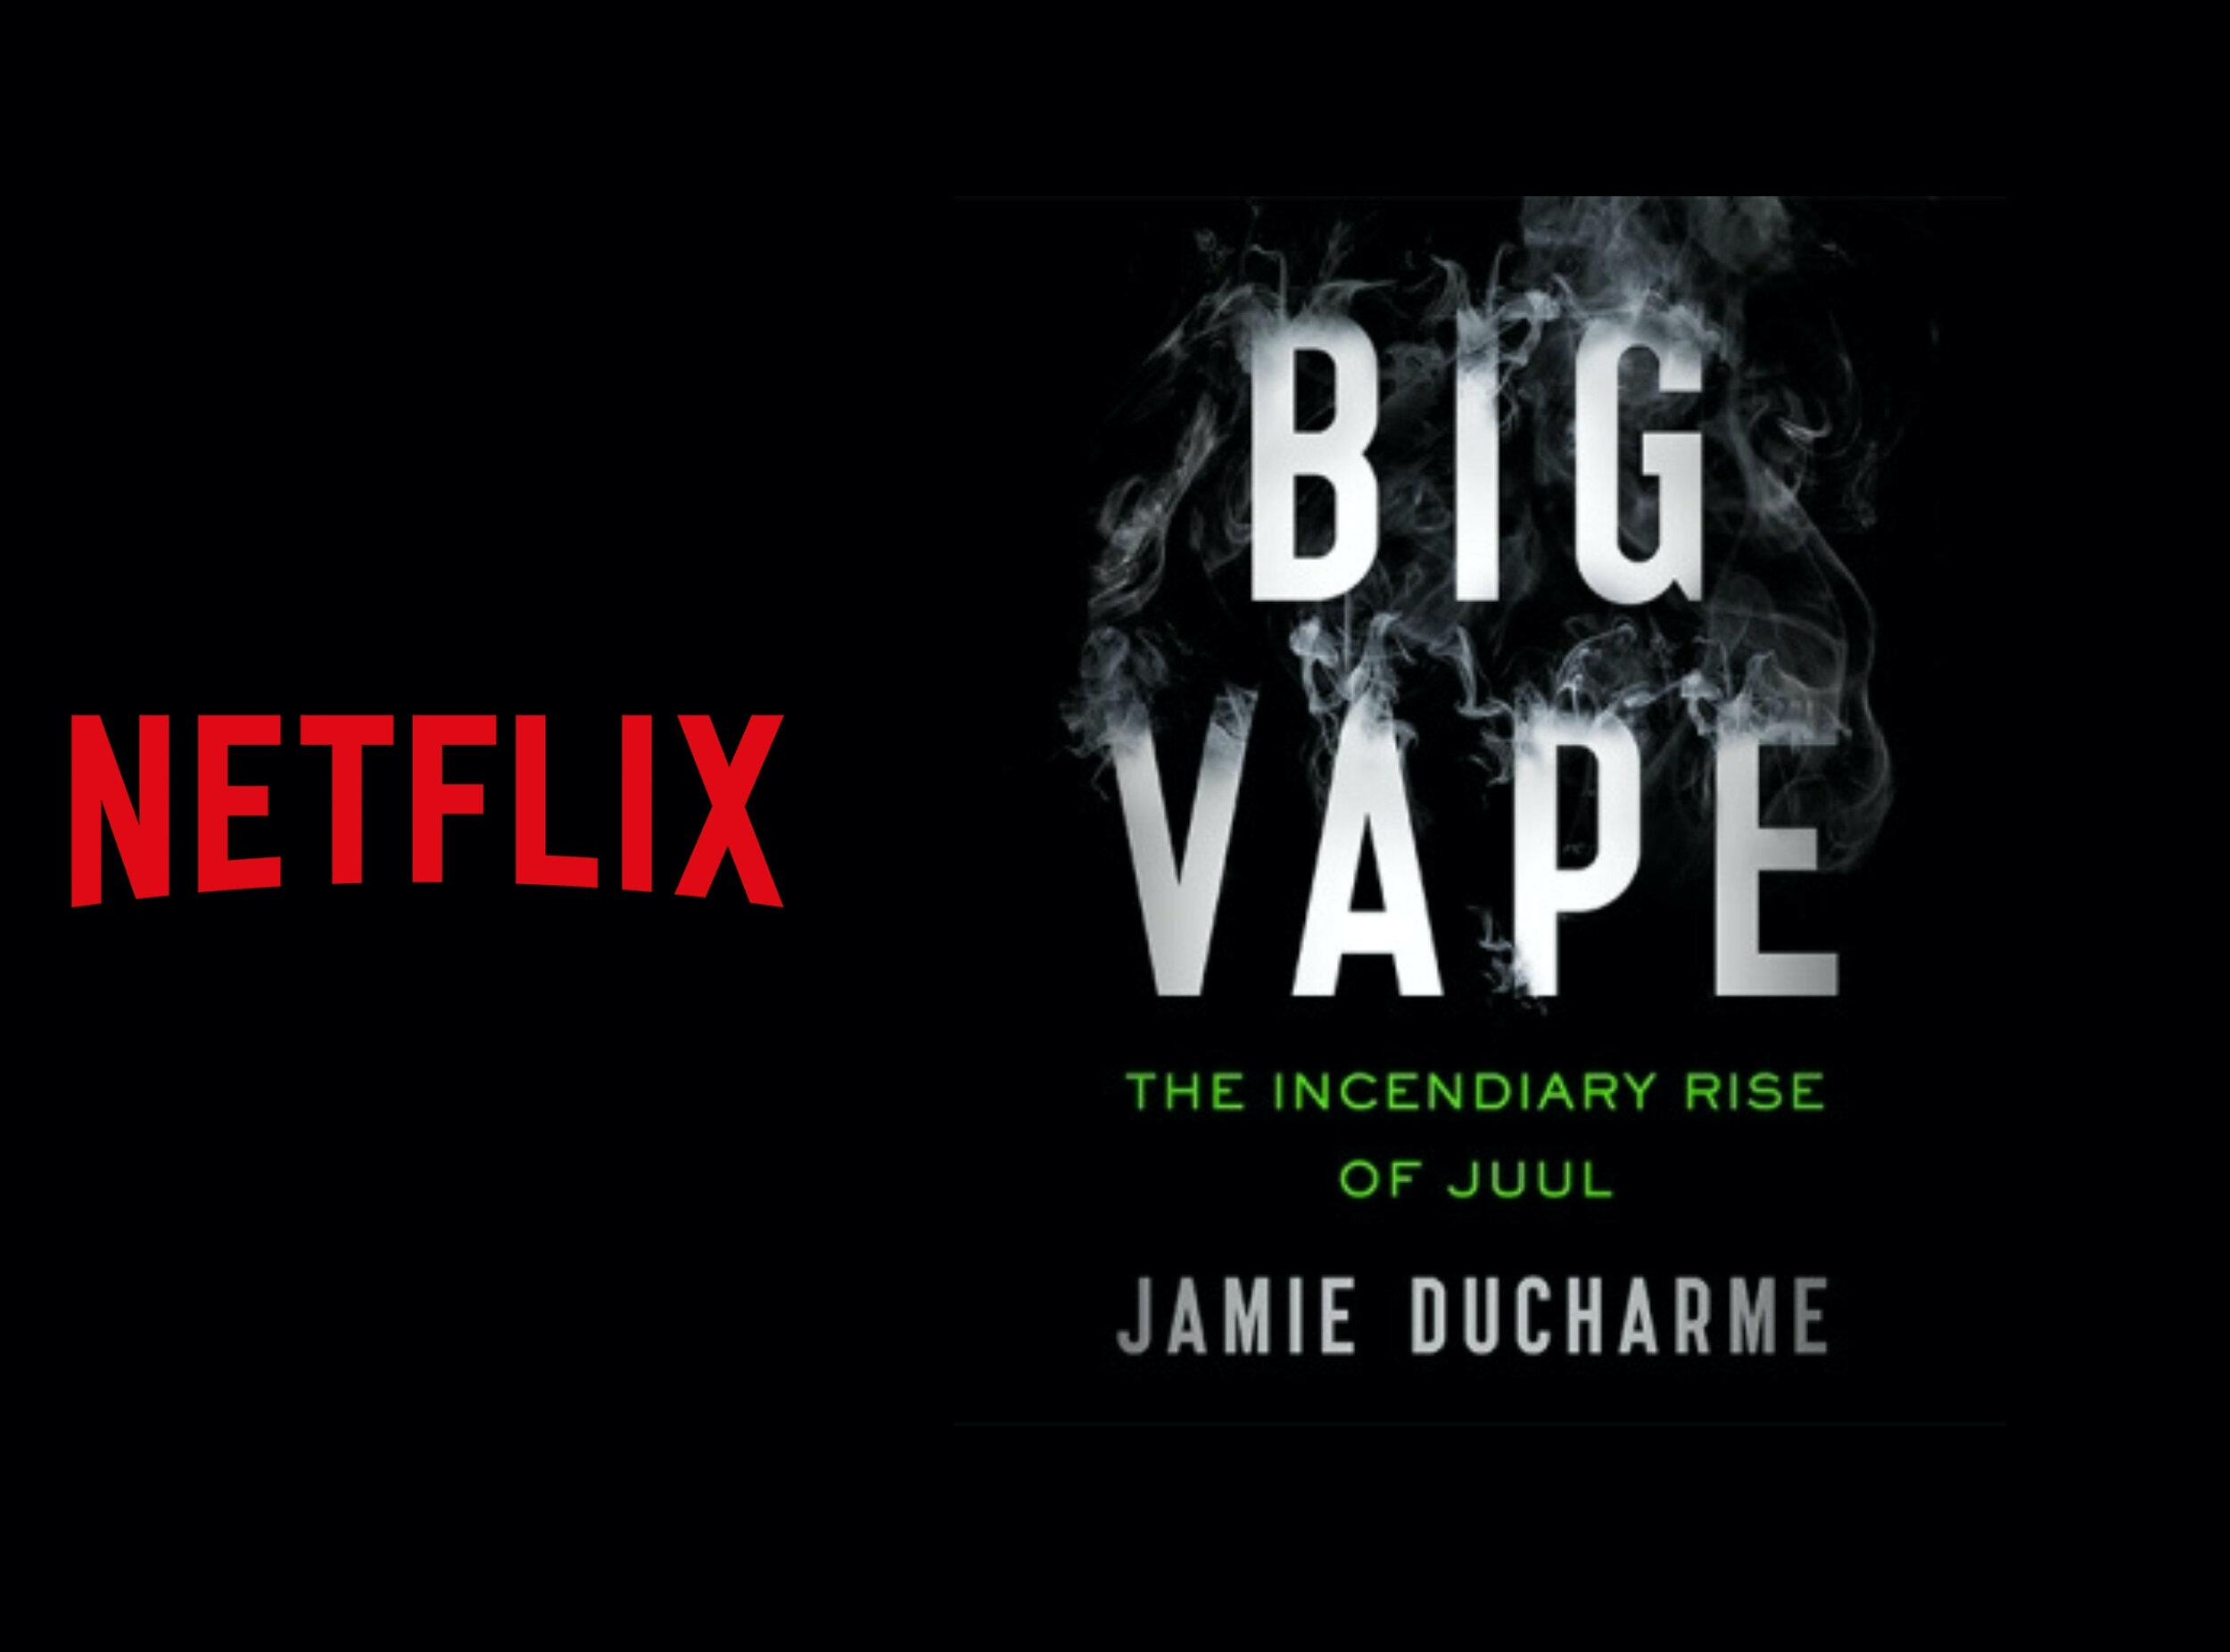 Big Vape: The Rise and Fall of Juul - An Inside Look at the Controversial Docuseries